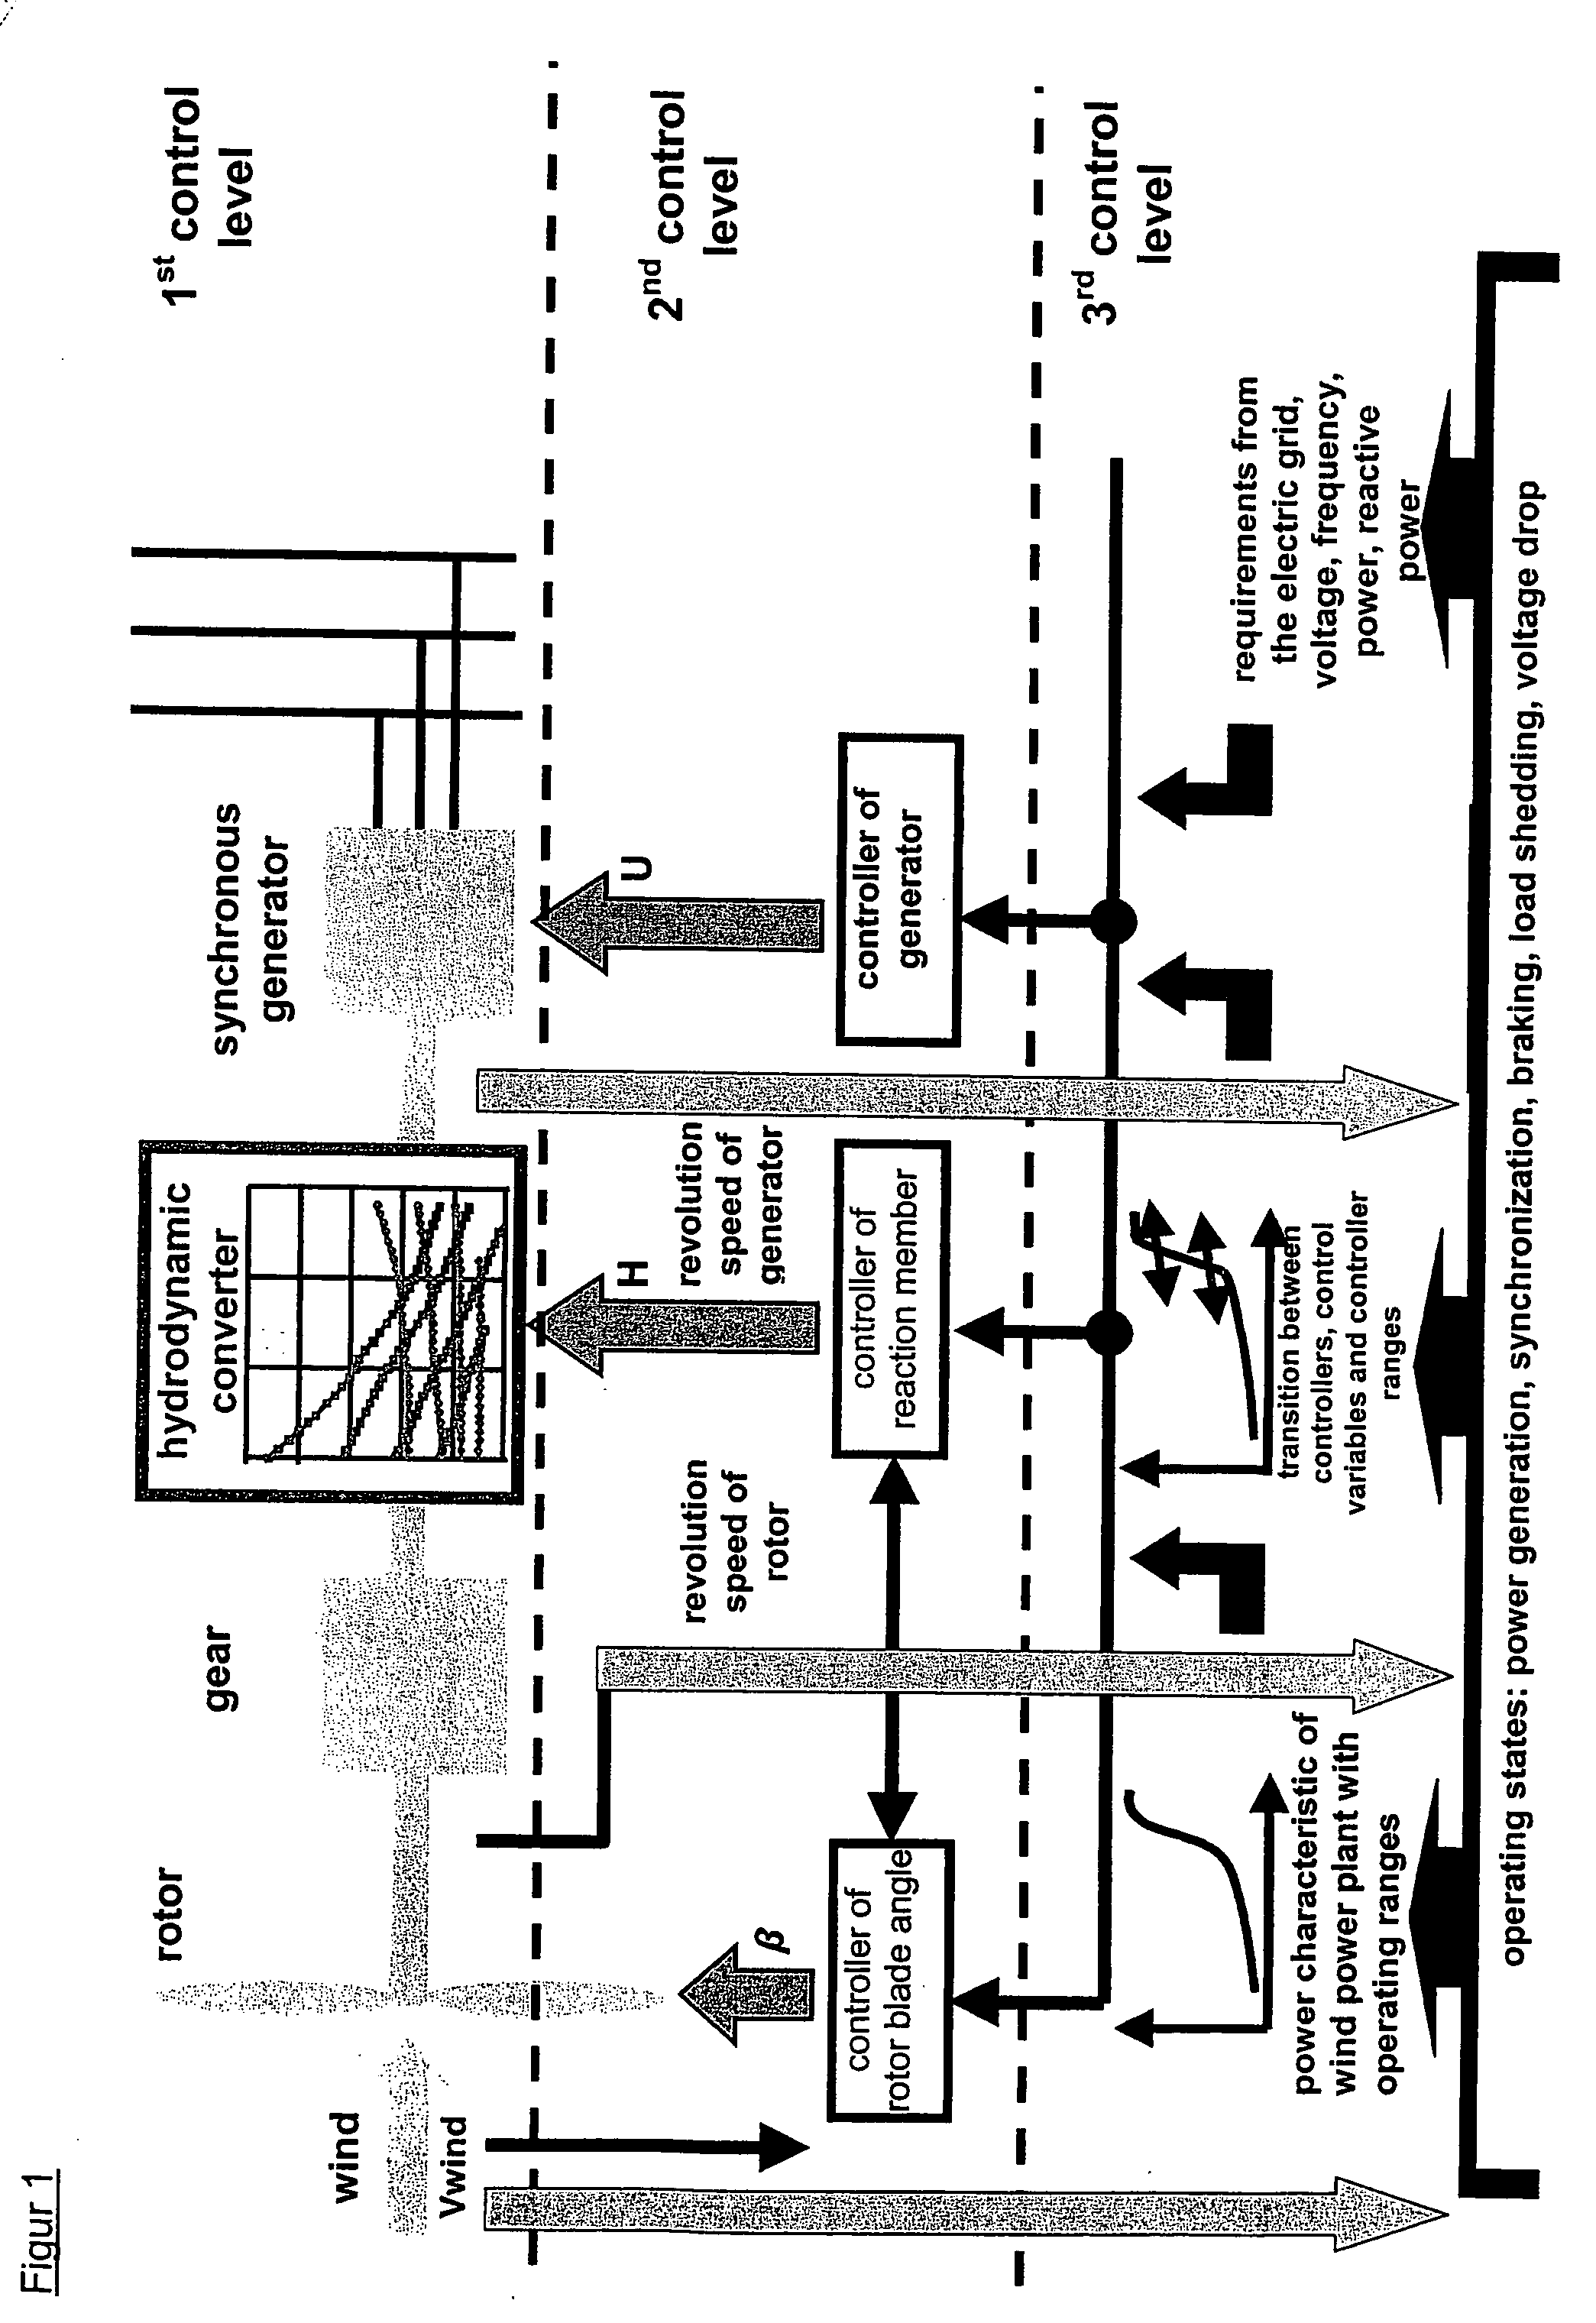 Control system for a wind power plant with hydrodynamic gear